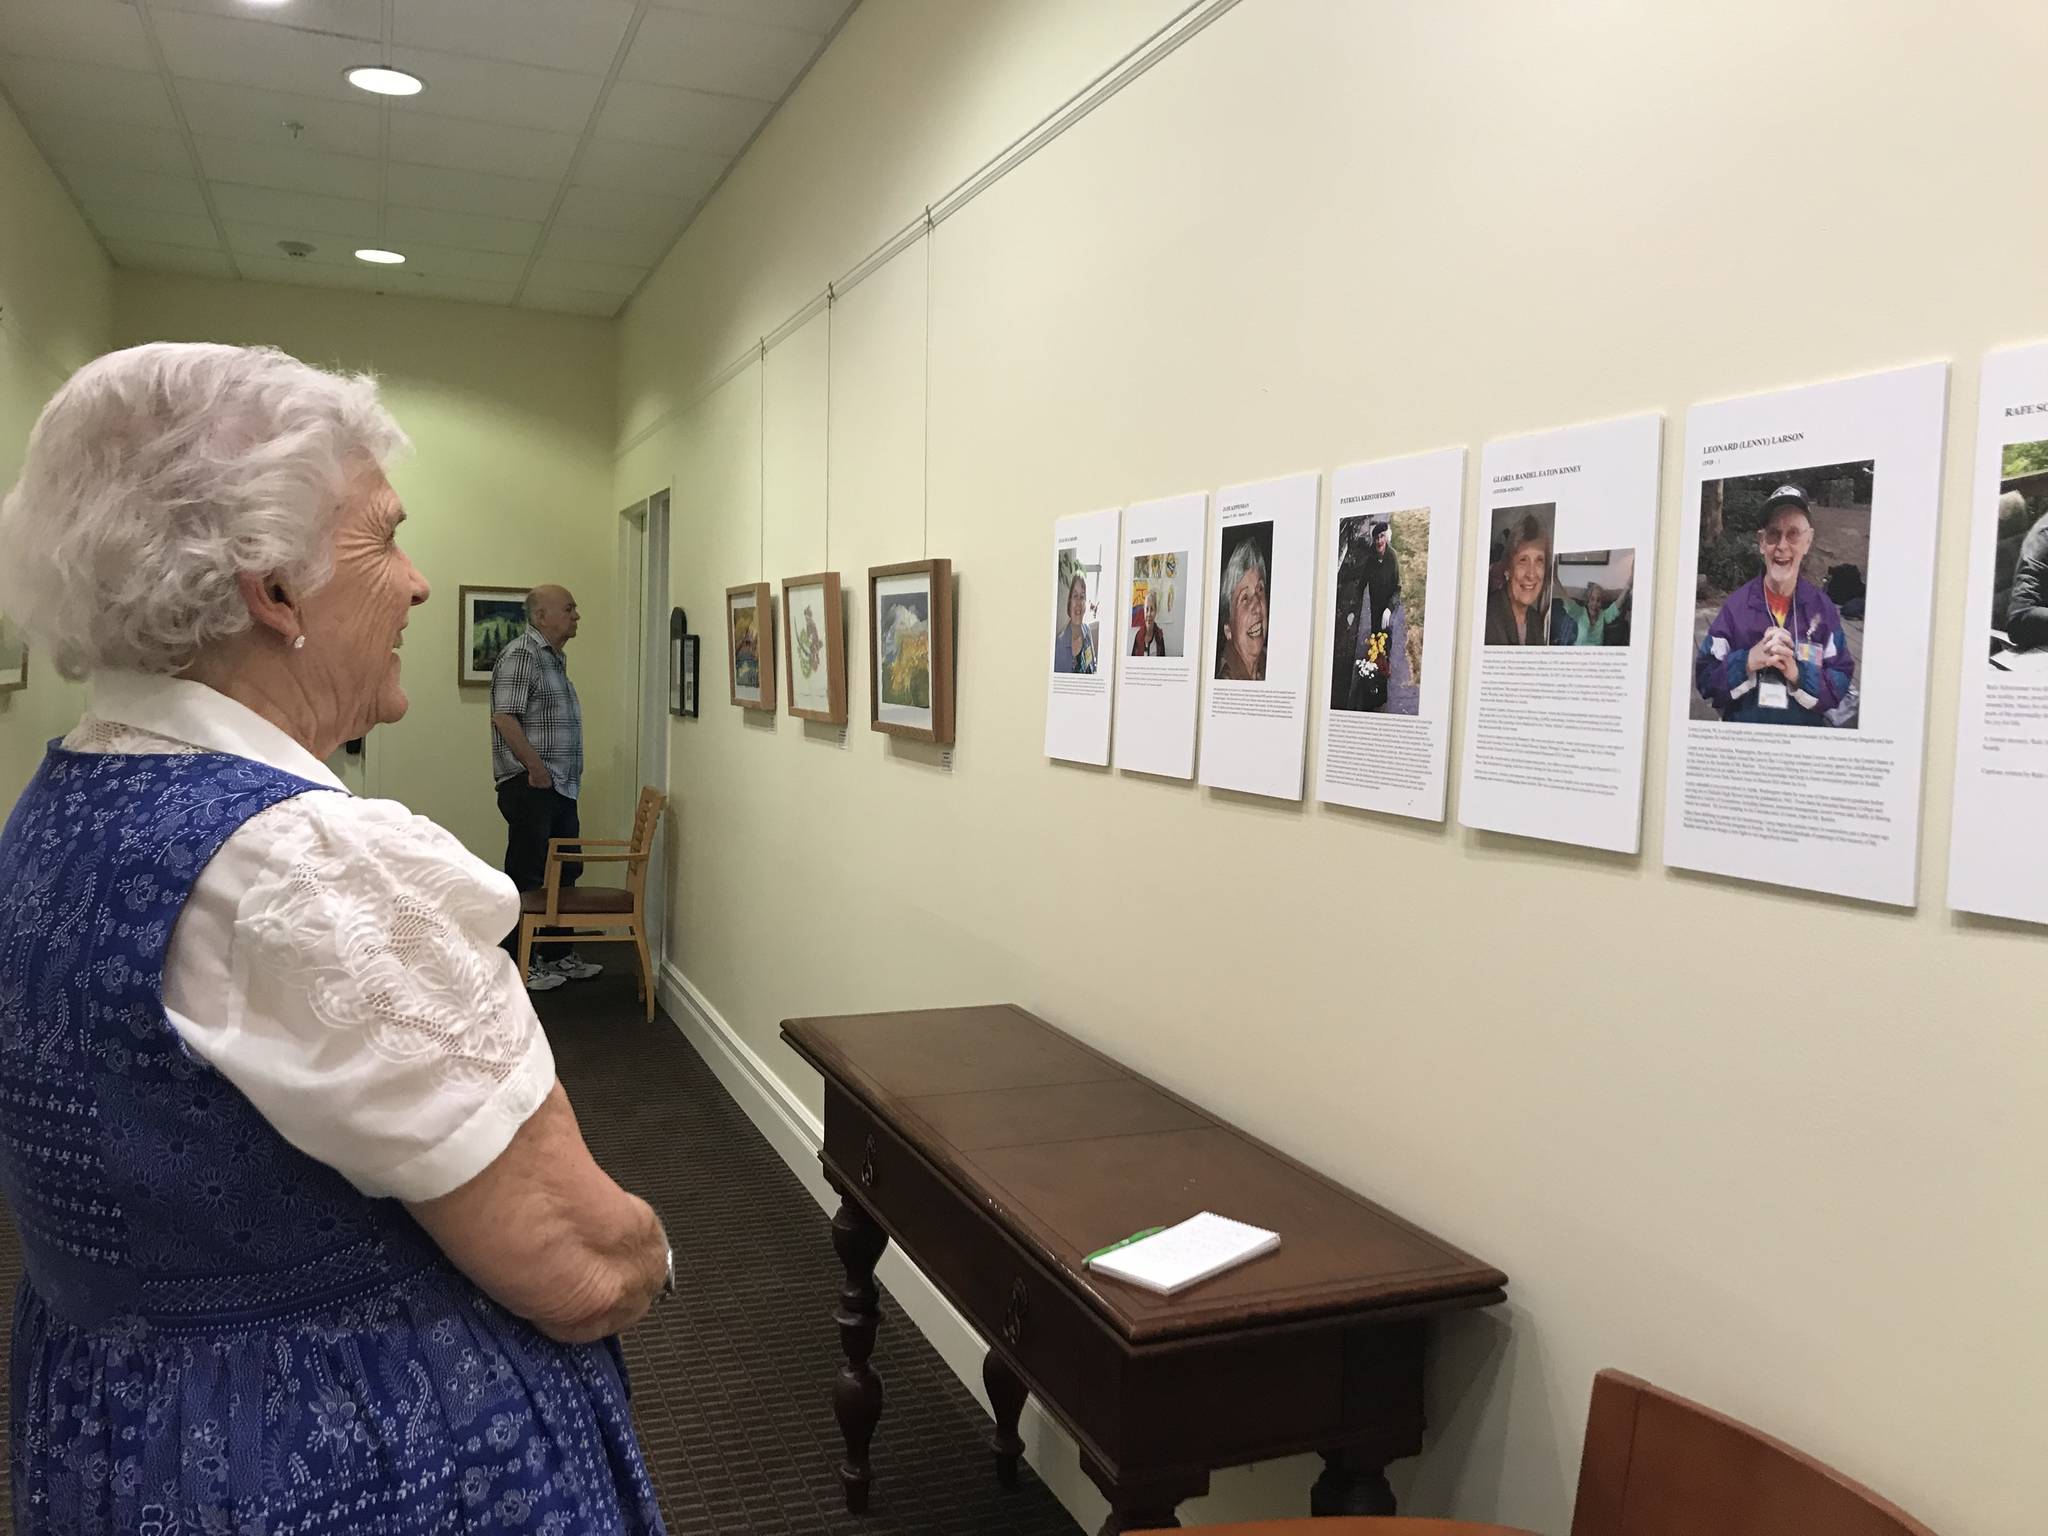 Dianne Miller reads about the artists featured in “The Art of Alzheimer’s” exhibit, currently at The Gardens at Town Square. Samantha Pak/staff photo